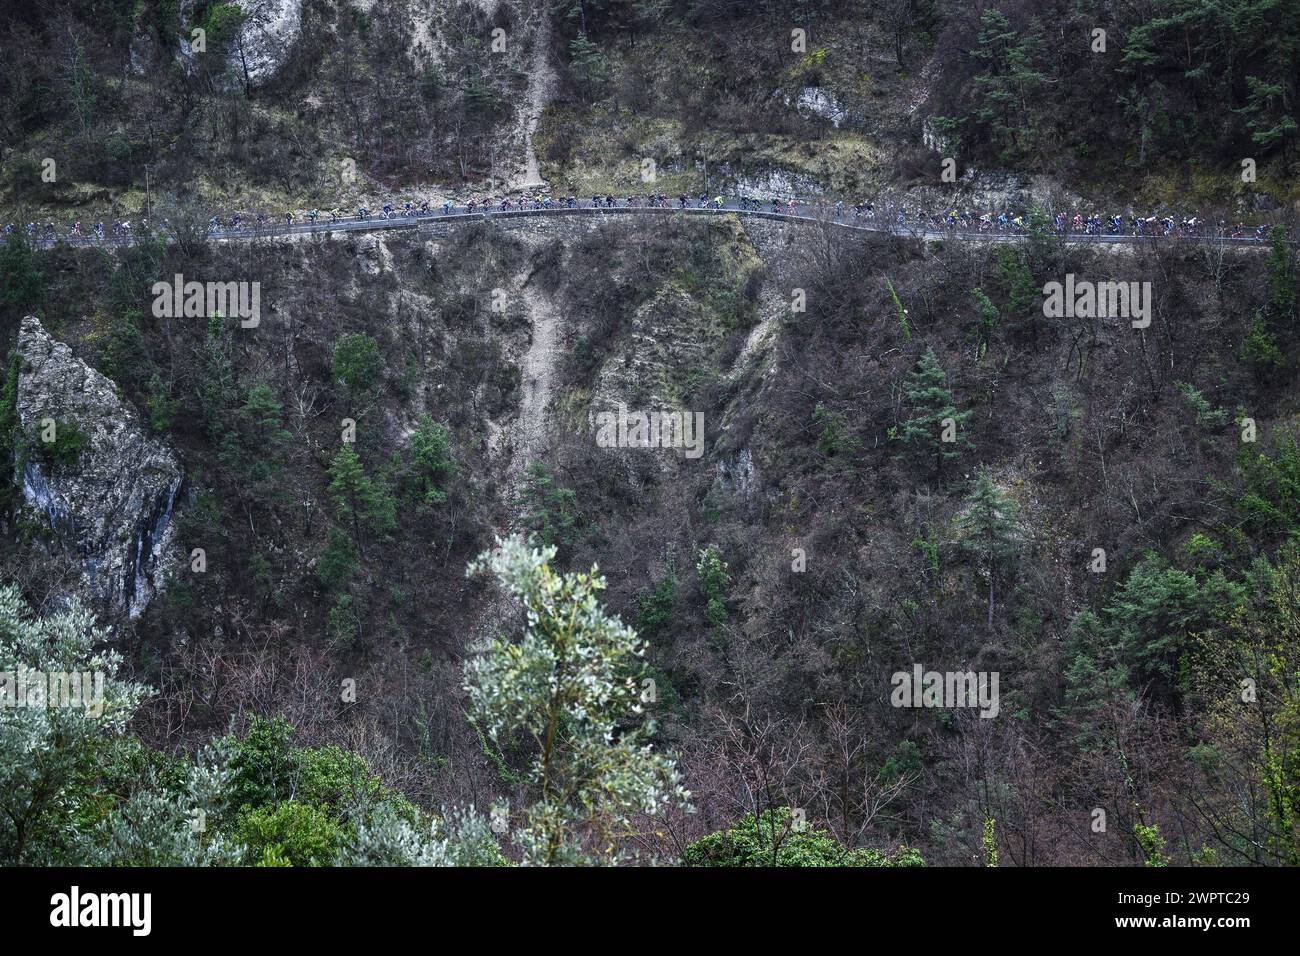 Illustration picture shows the peloton during the seventh stage of the